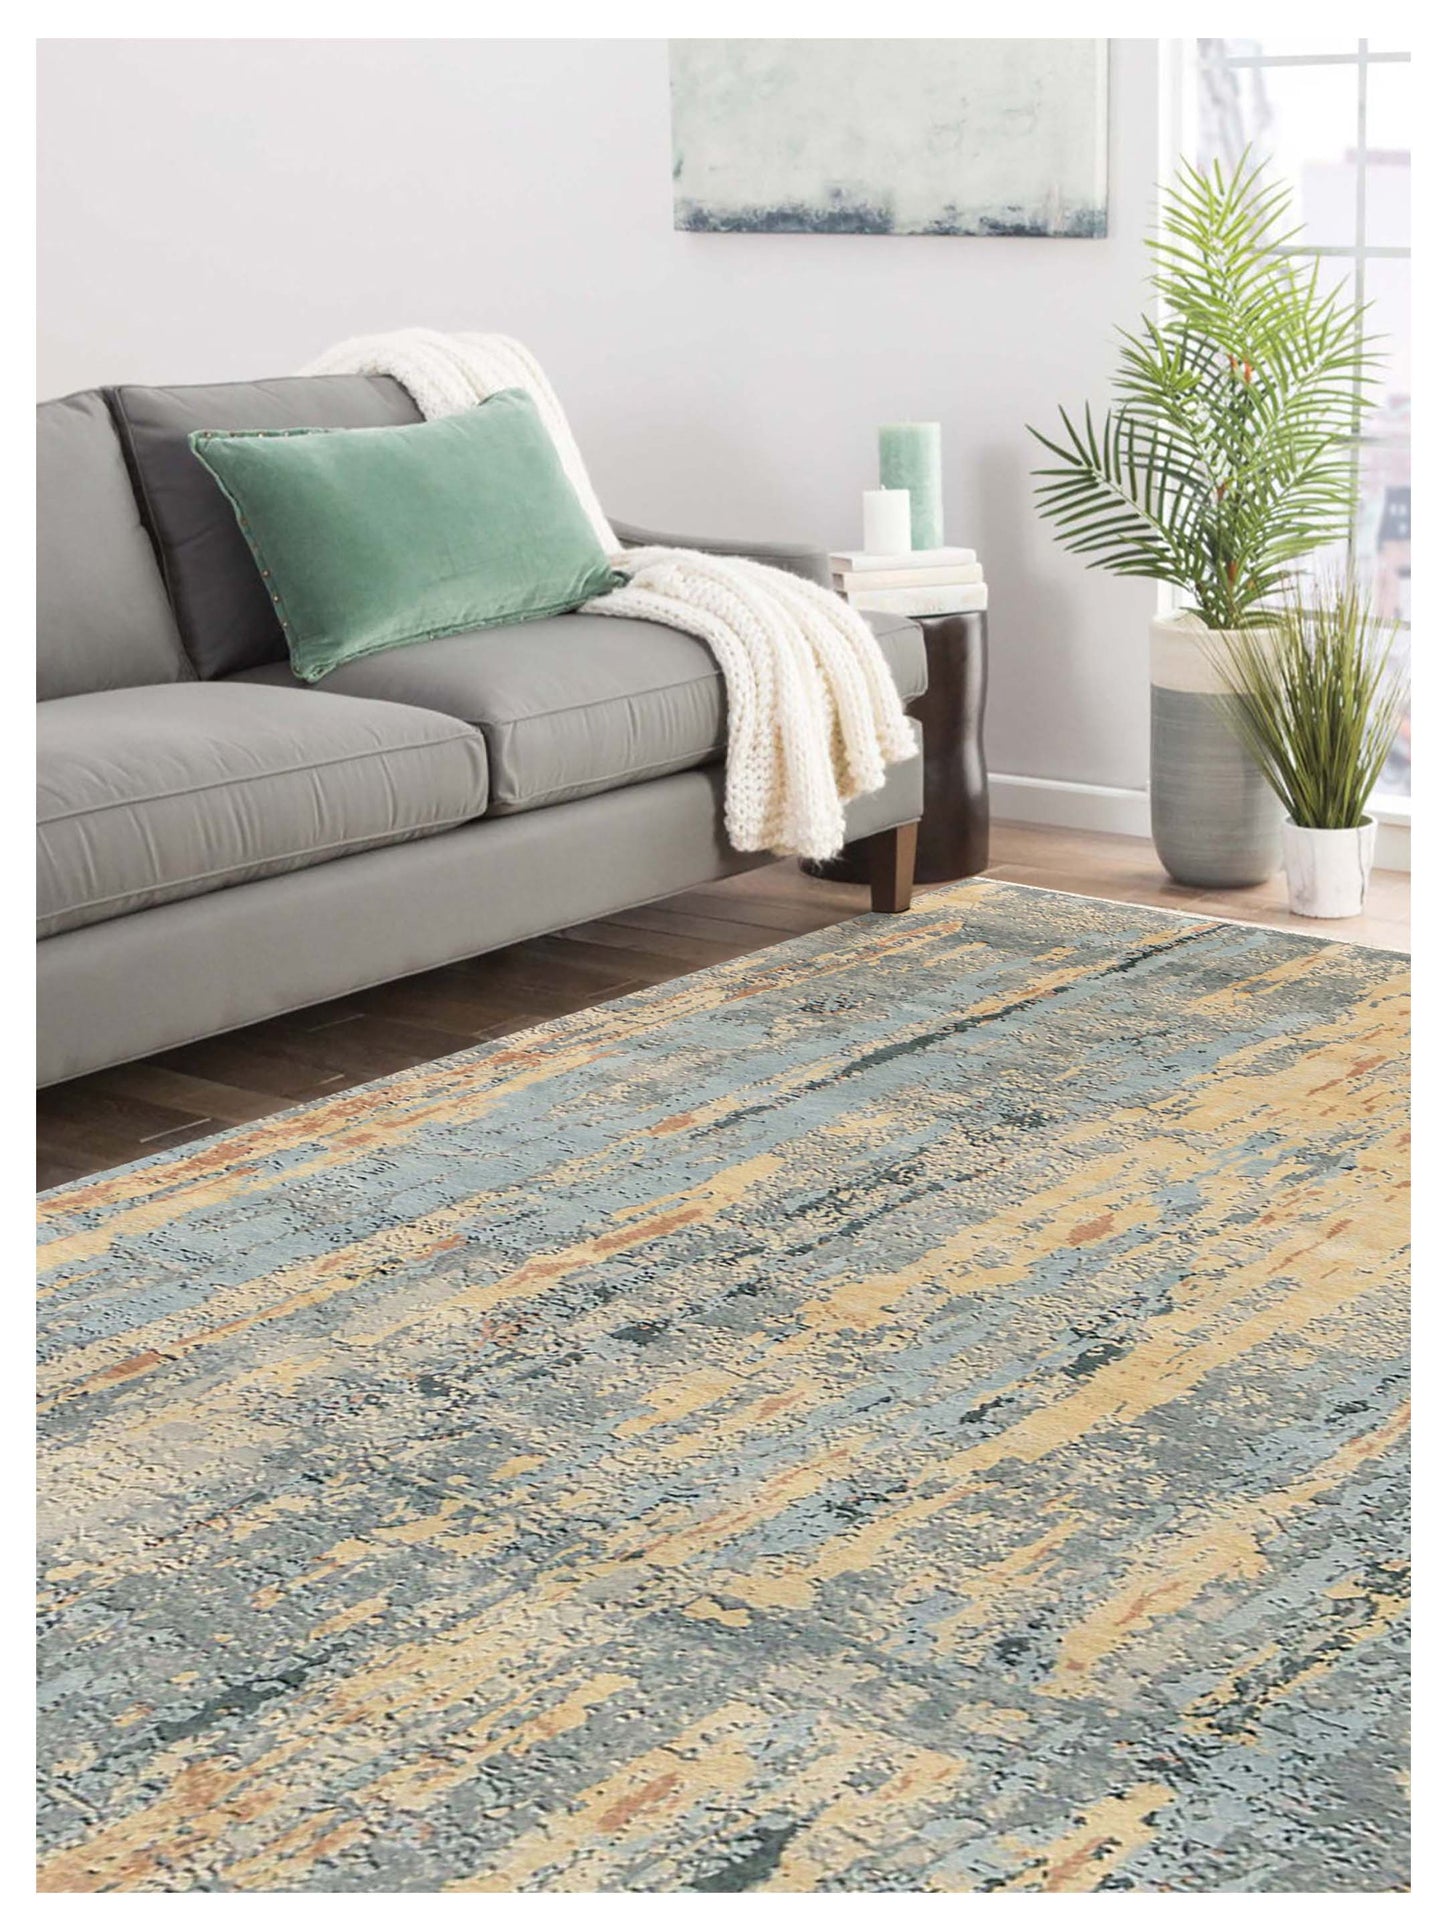 Limited MELBOURNE ME-253 Deep Silver  Transitional Knotted Rug